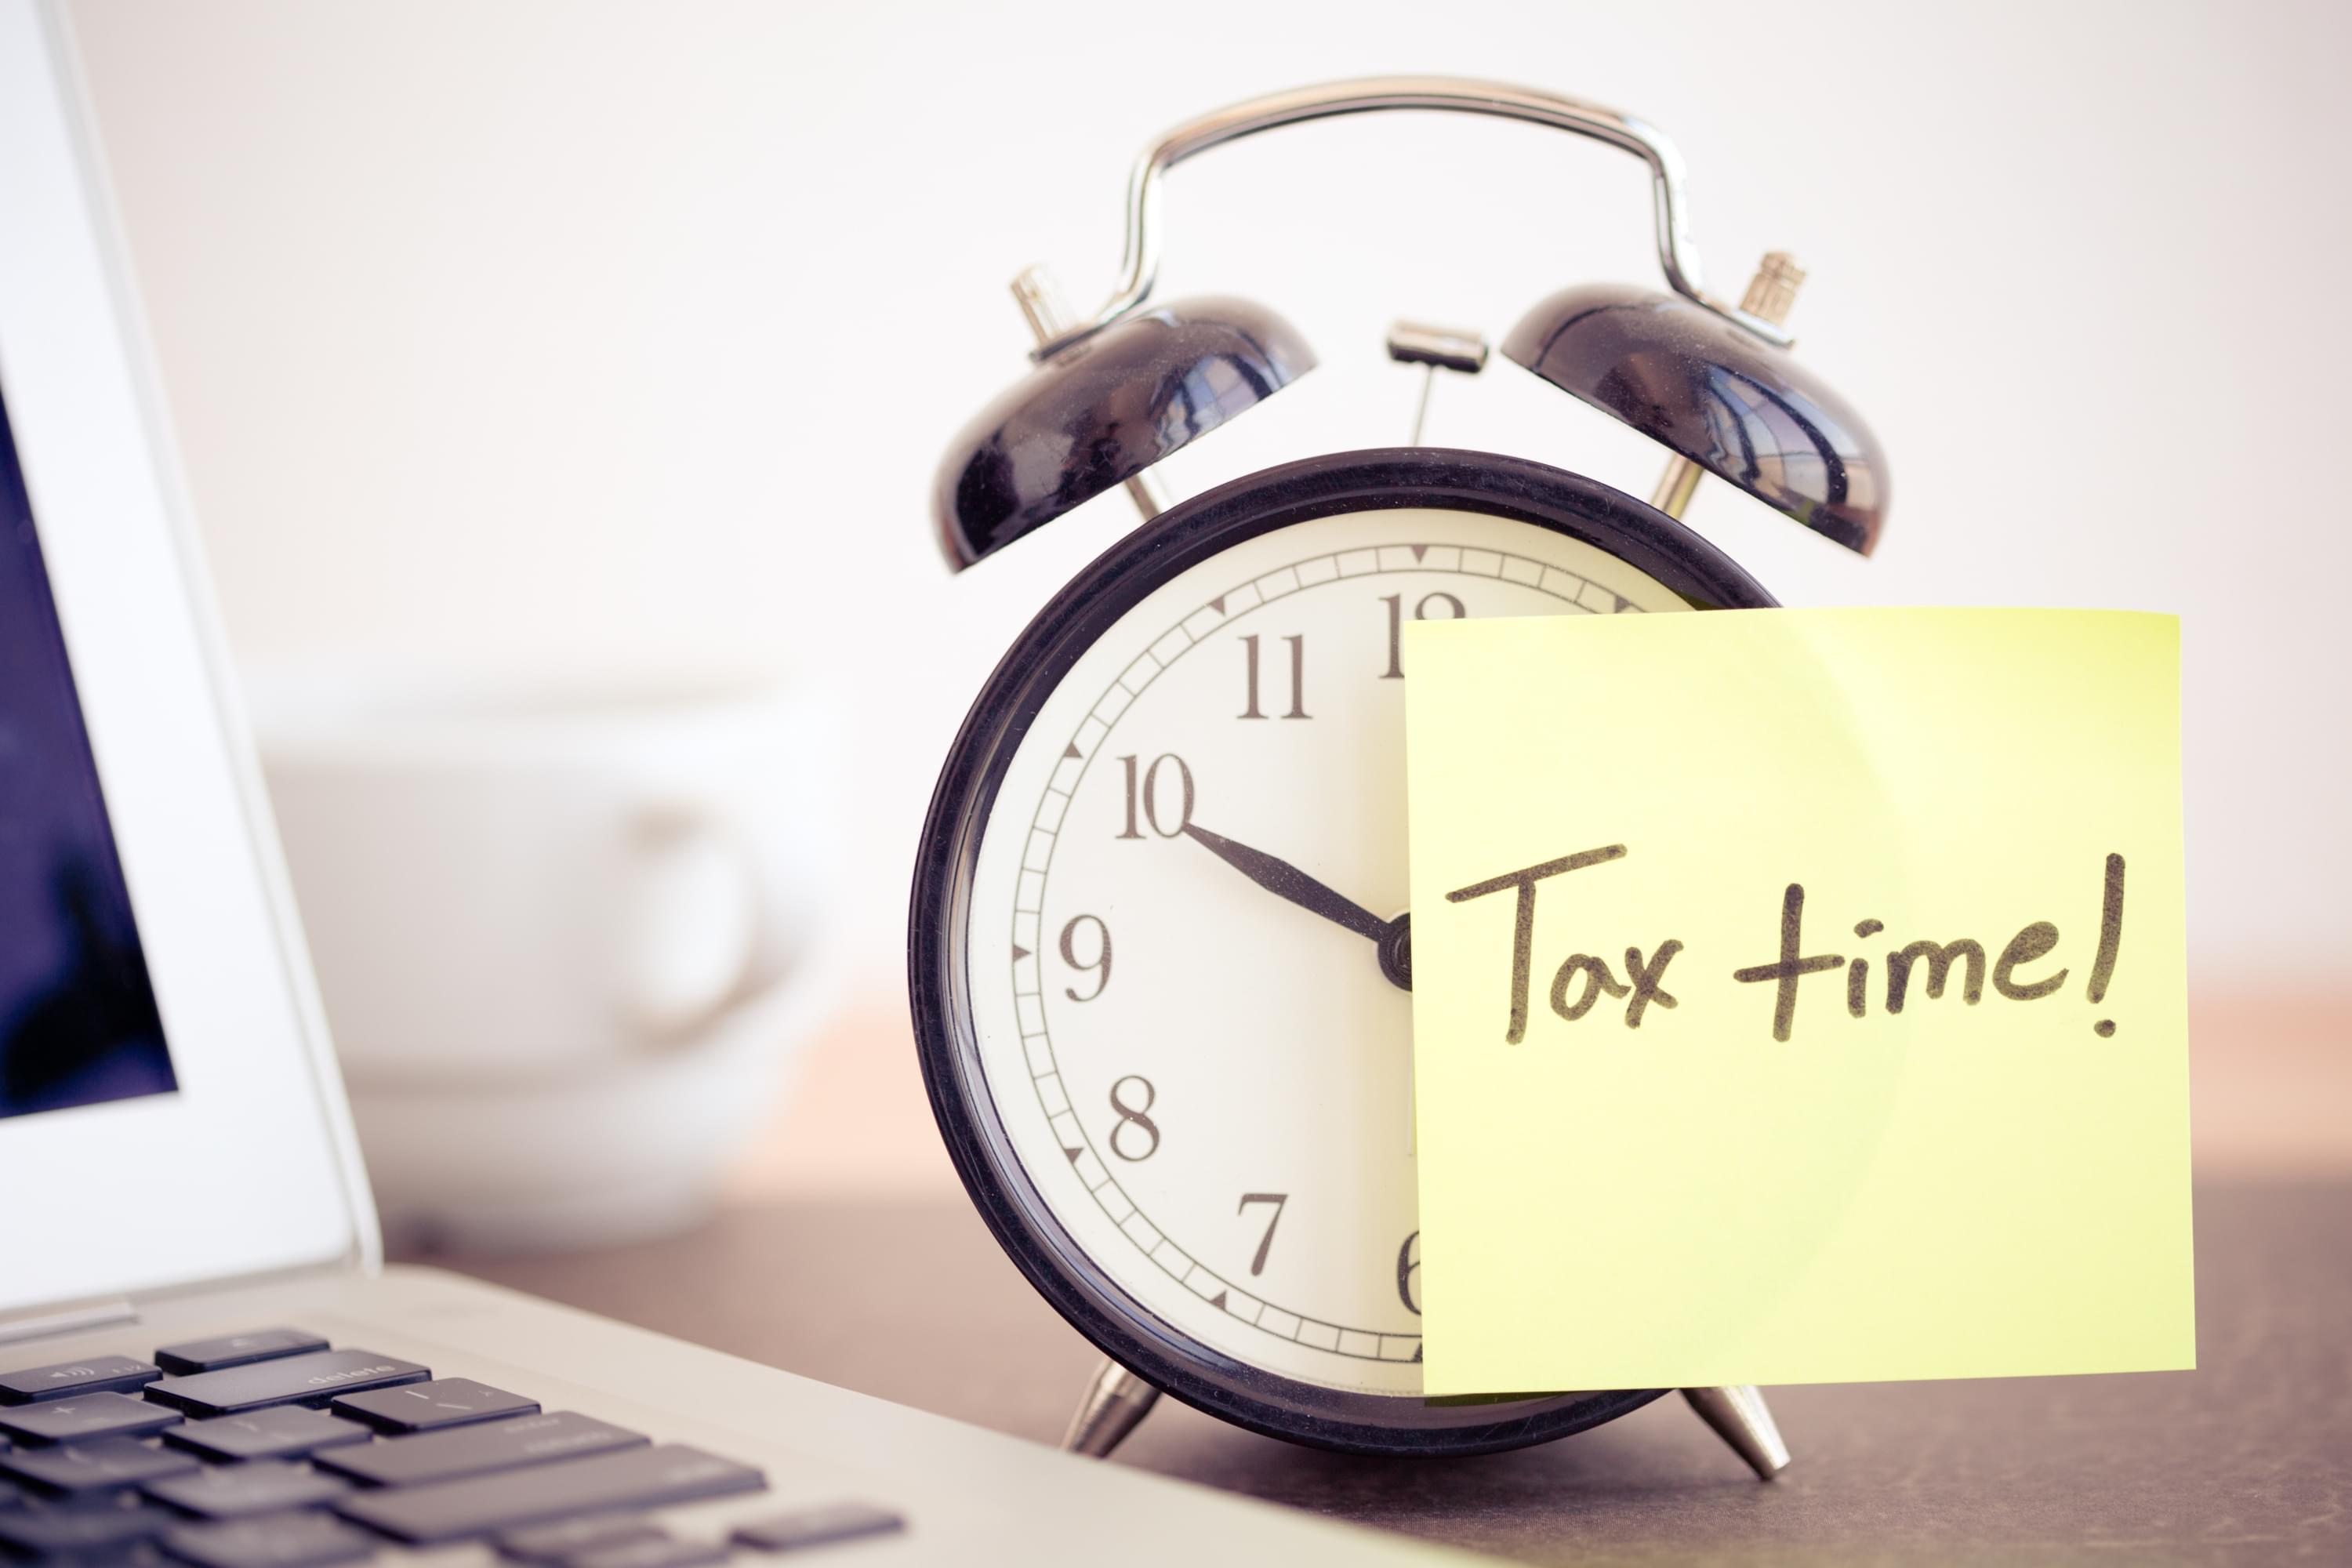 CPATaxSolver discusses why you should file your taxes on time